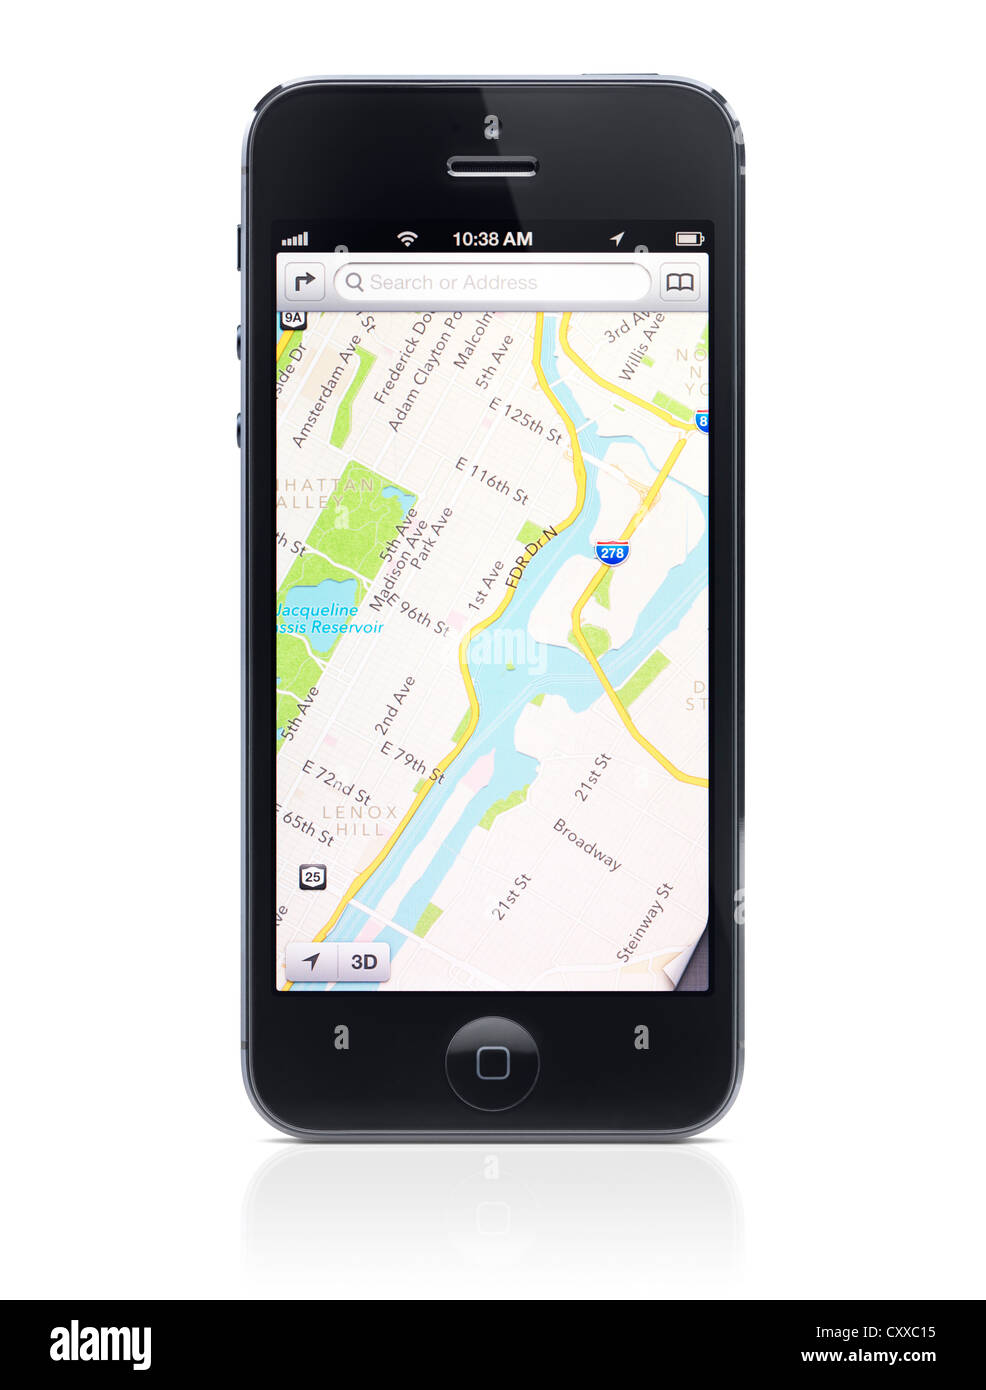 iPhone 5 with Apple map app, new Apple mapping service on its display  isolated on white background with clipping path Stock Photo - Alamy